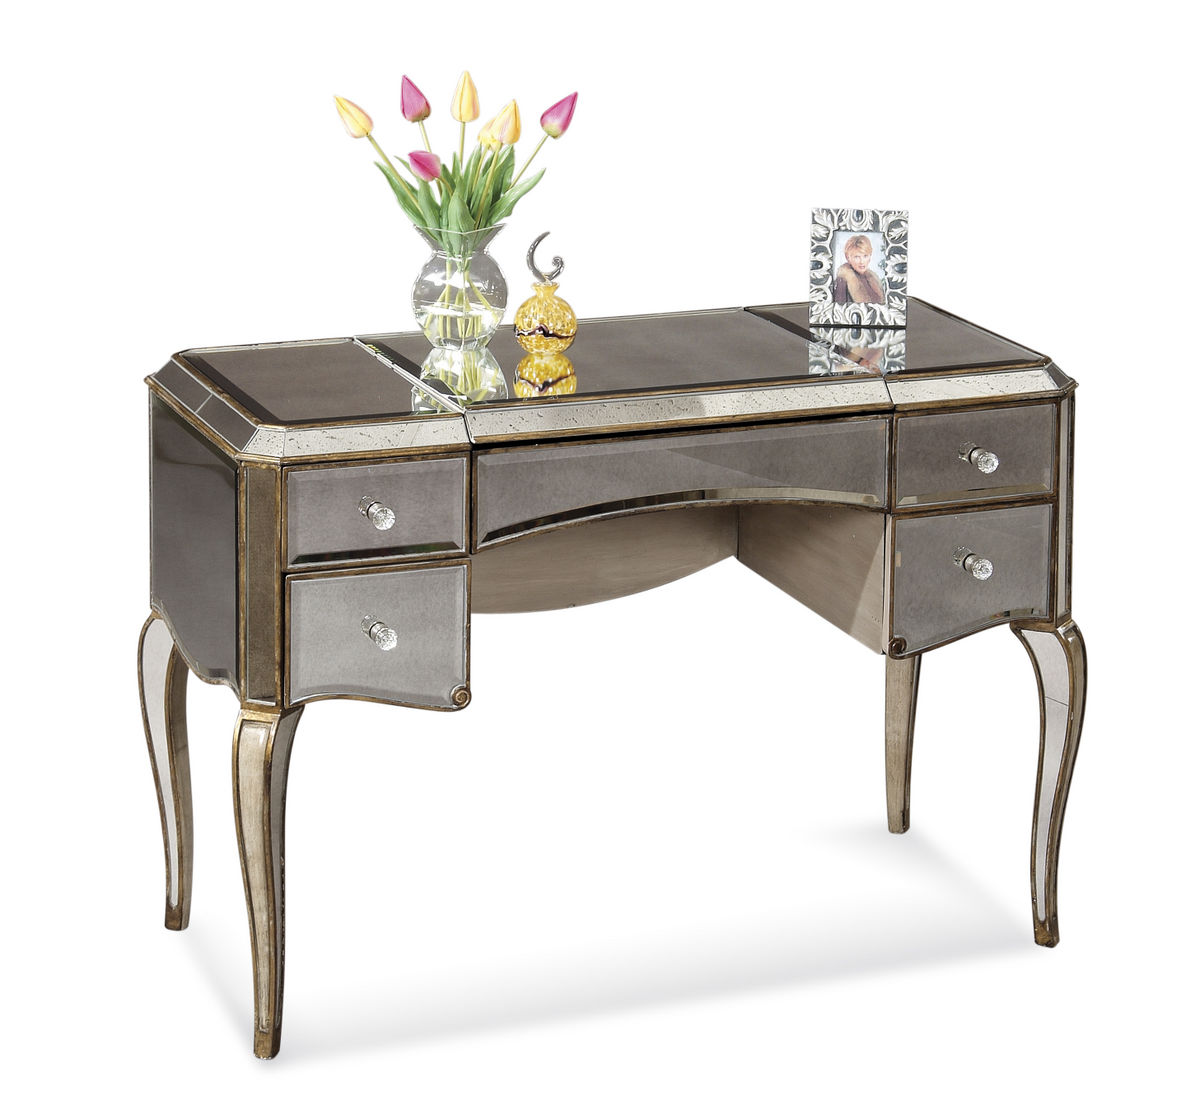 Free Download Mirrored Furniture Mirrored Desks Chests Tables Art